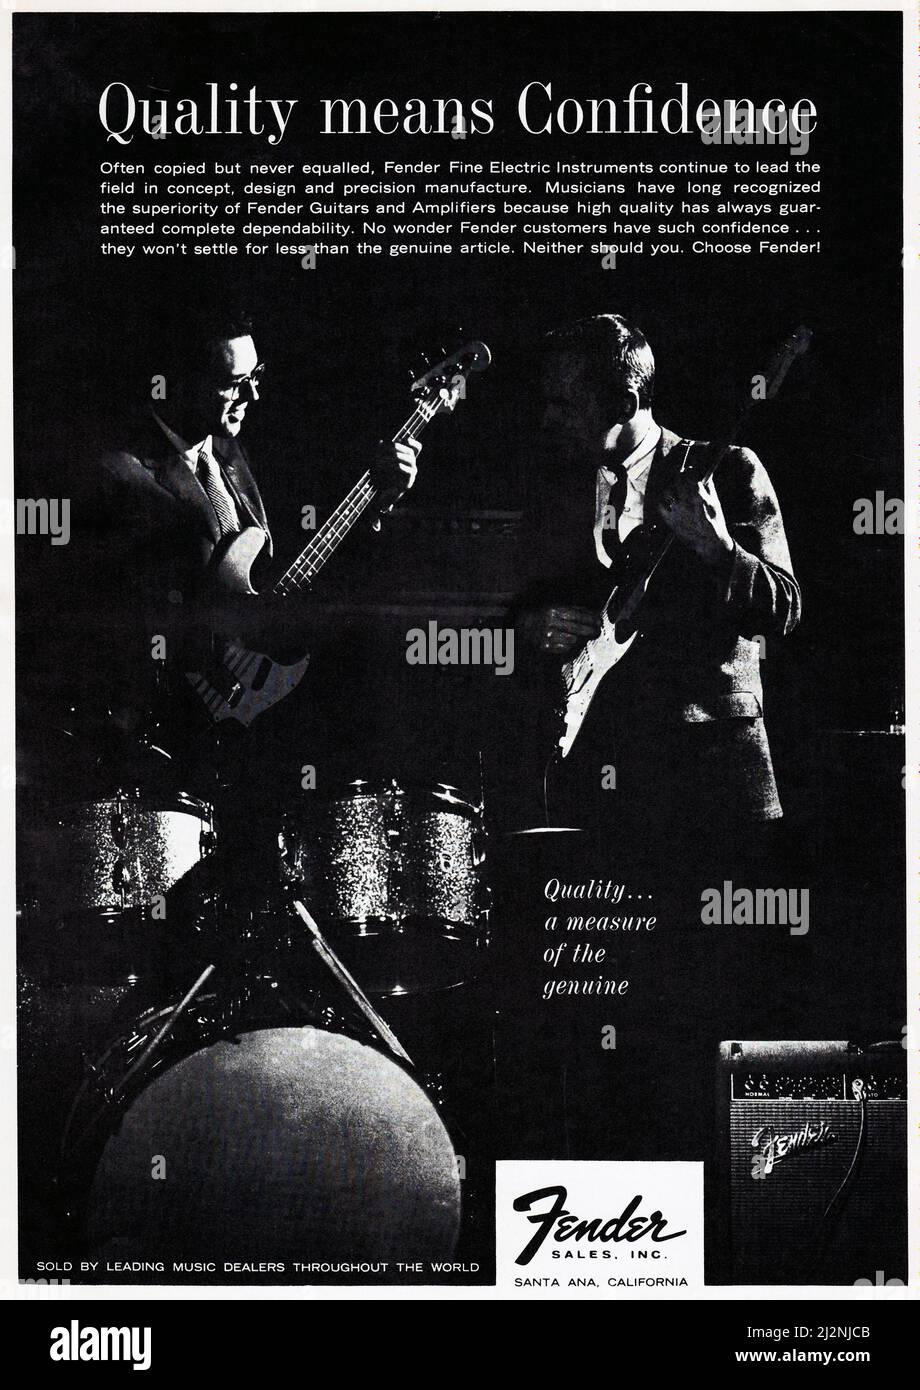 A contasty black & white Fender guitar ad from a 1969 American music magazine. It's proclaiming that quality menas confidence. Stock Photo